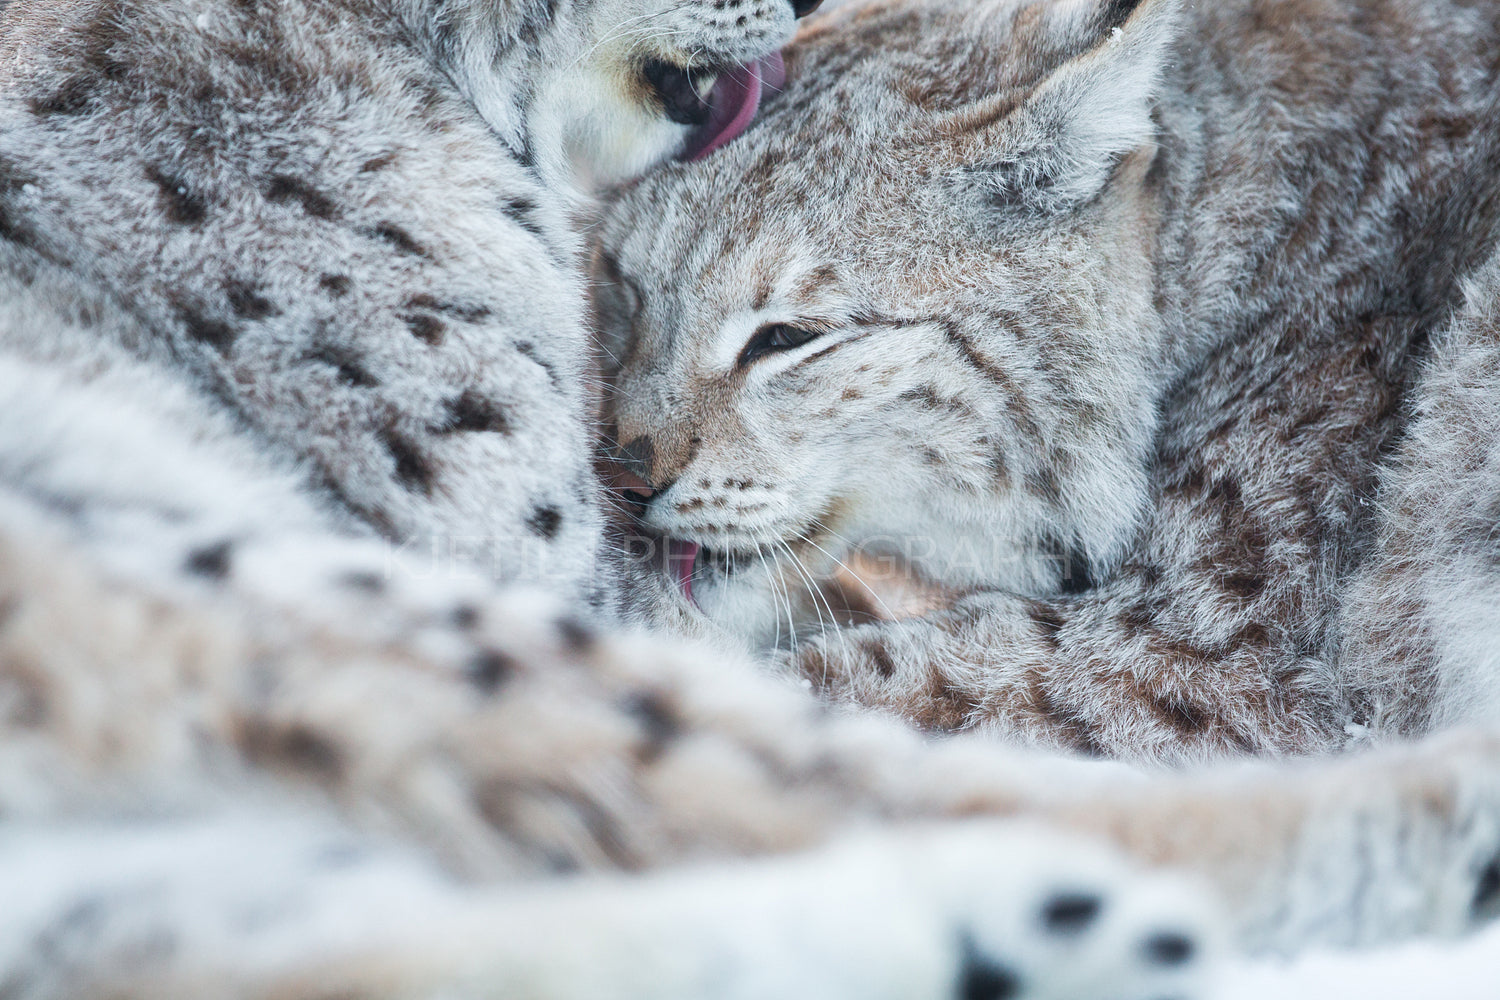 Two lynx cleaning fur in snow